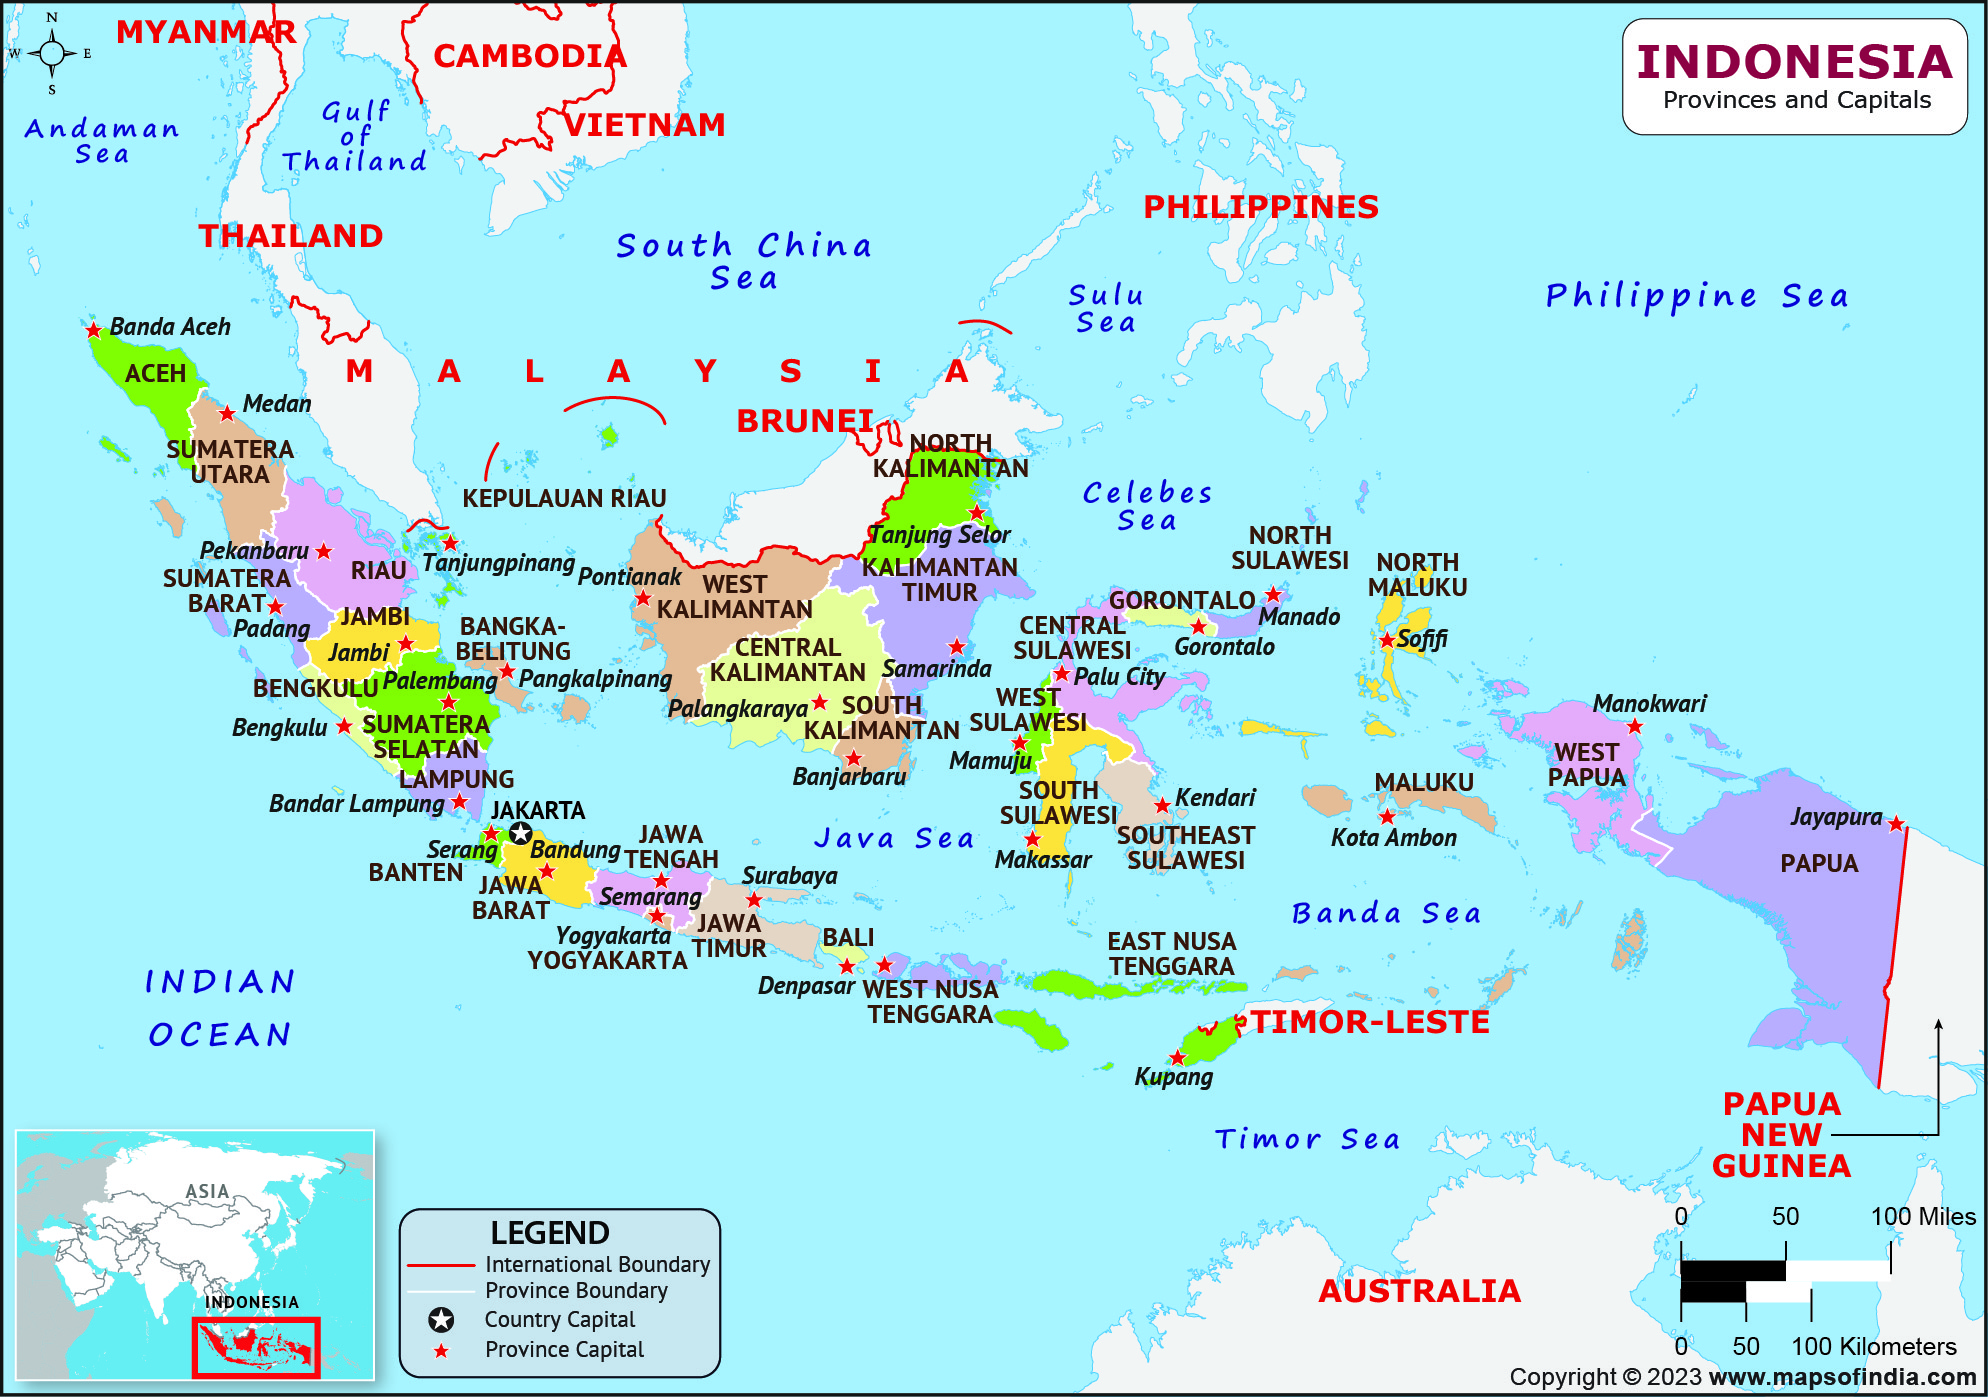 Indonesia Provinces  and Capital Map